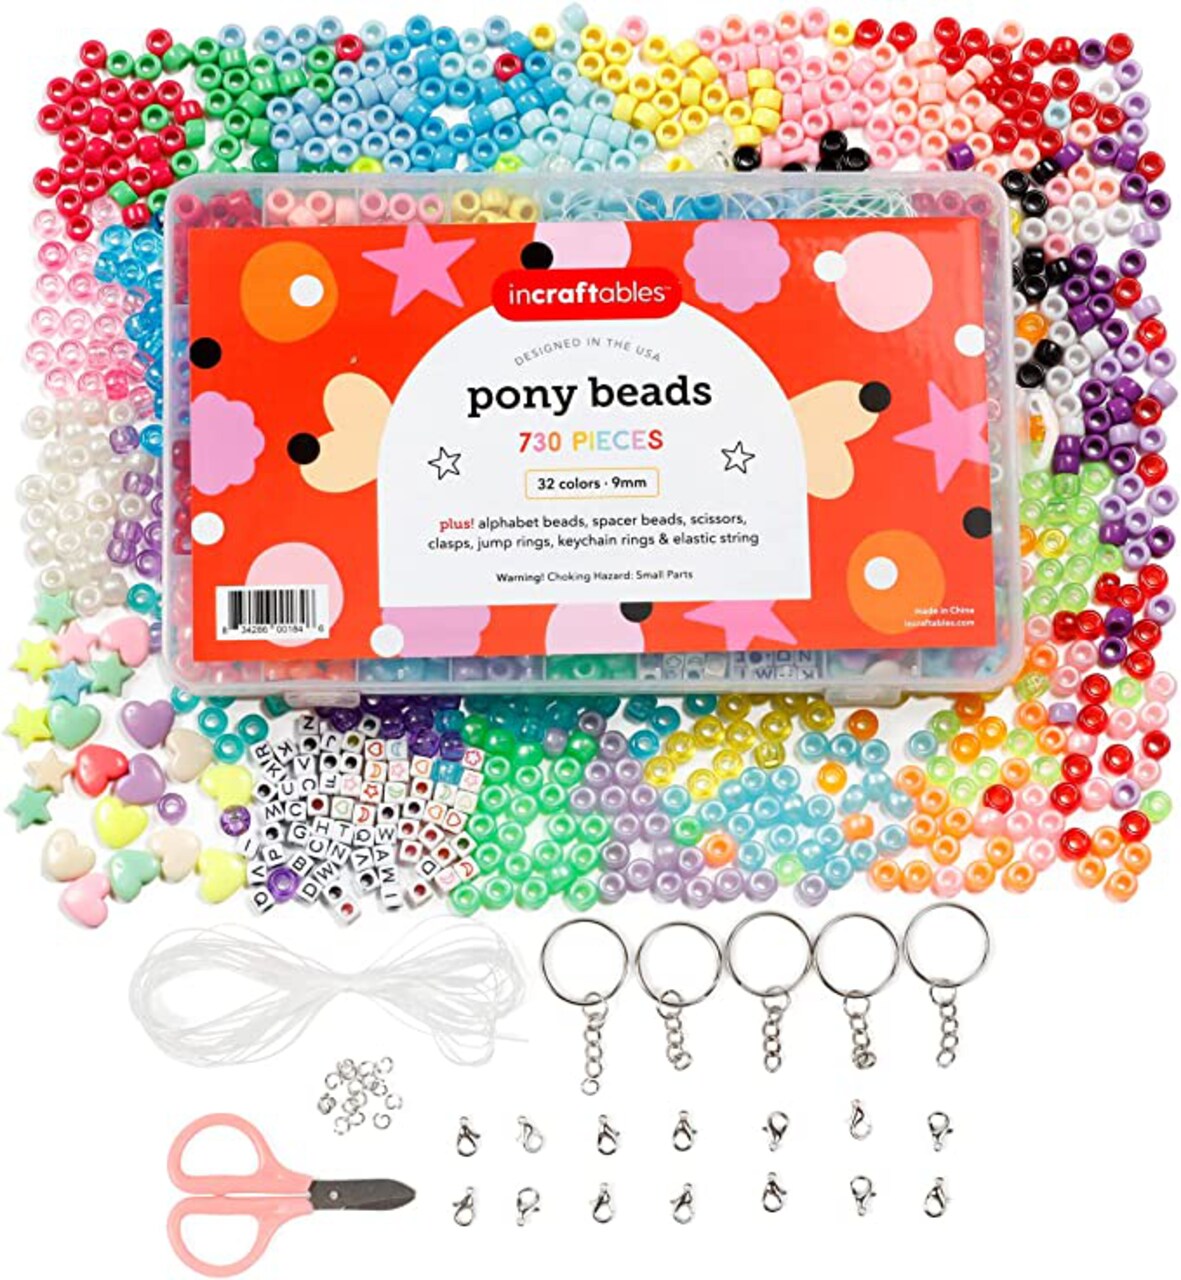 Incraftables Pony Beads for Bracelets Making 9mm (32 colors). Large Rainbow Pony  Bead Bulk Kit for DIY Jewelry & Hair Craft. Plastic Kandi Bead Set (730pcs)  w/ Alphabet Letter, Small Colorful Spacers